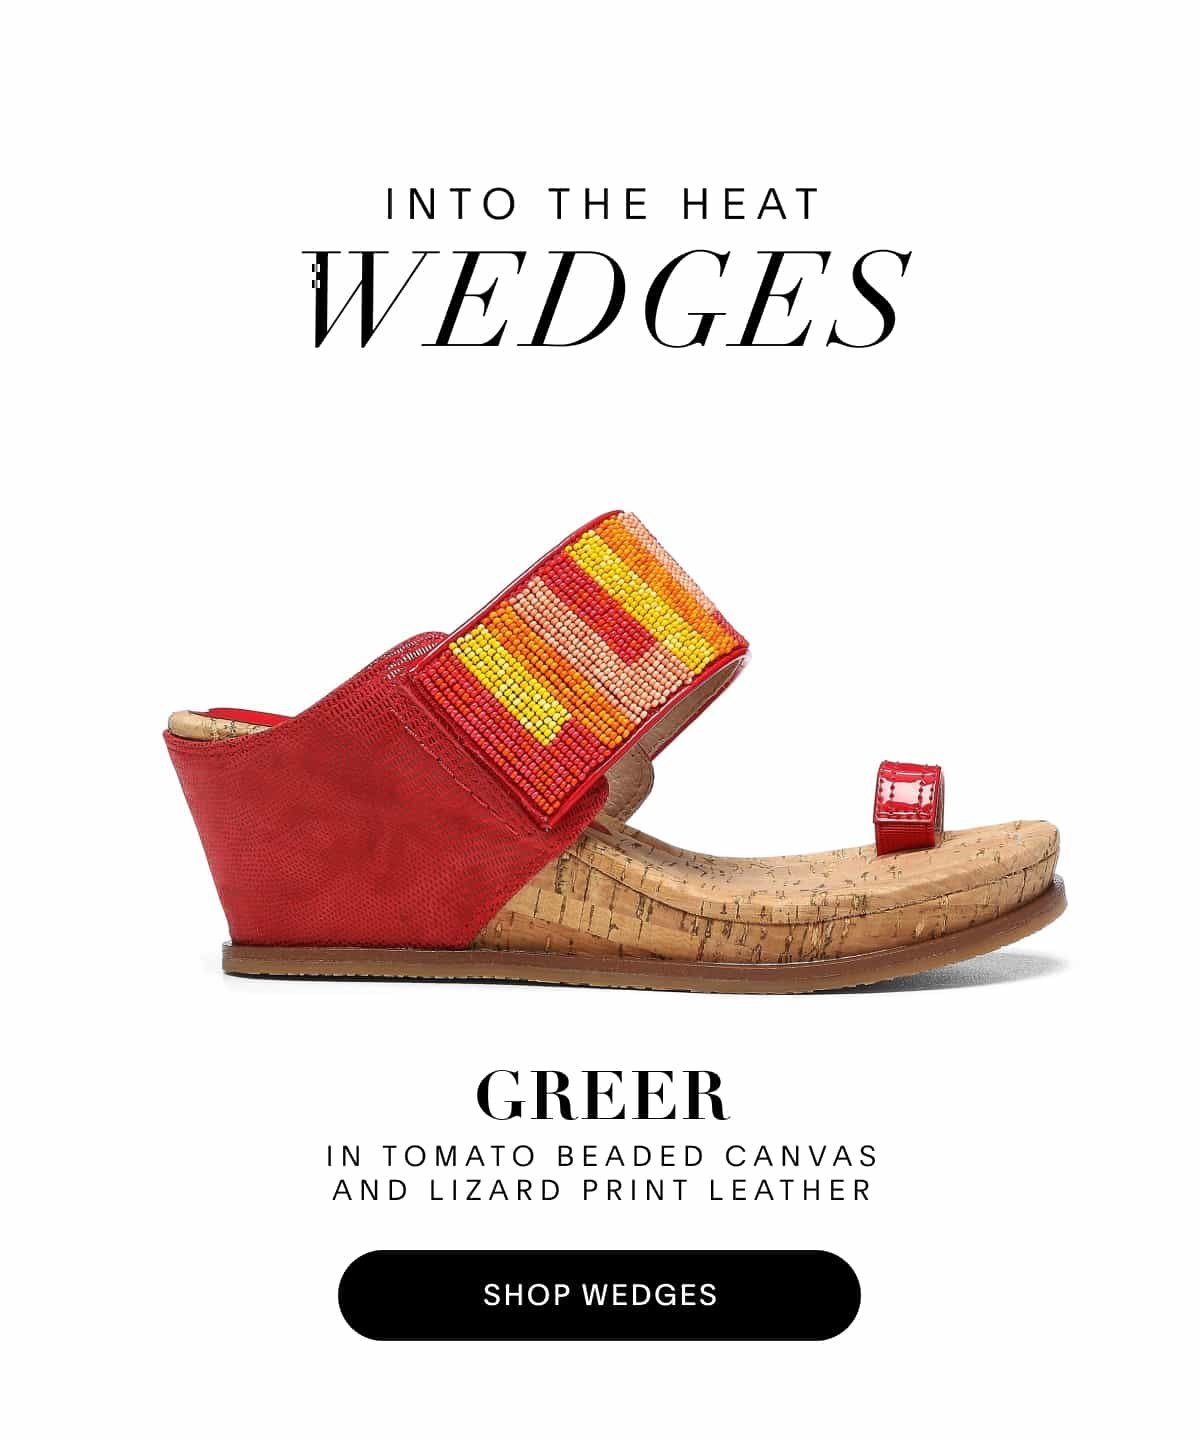 INTO THE HEAT Wedges - Greer